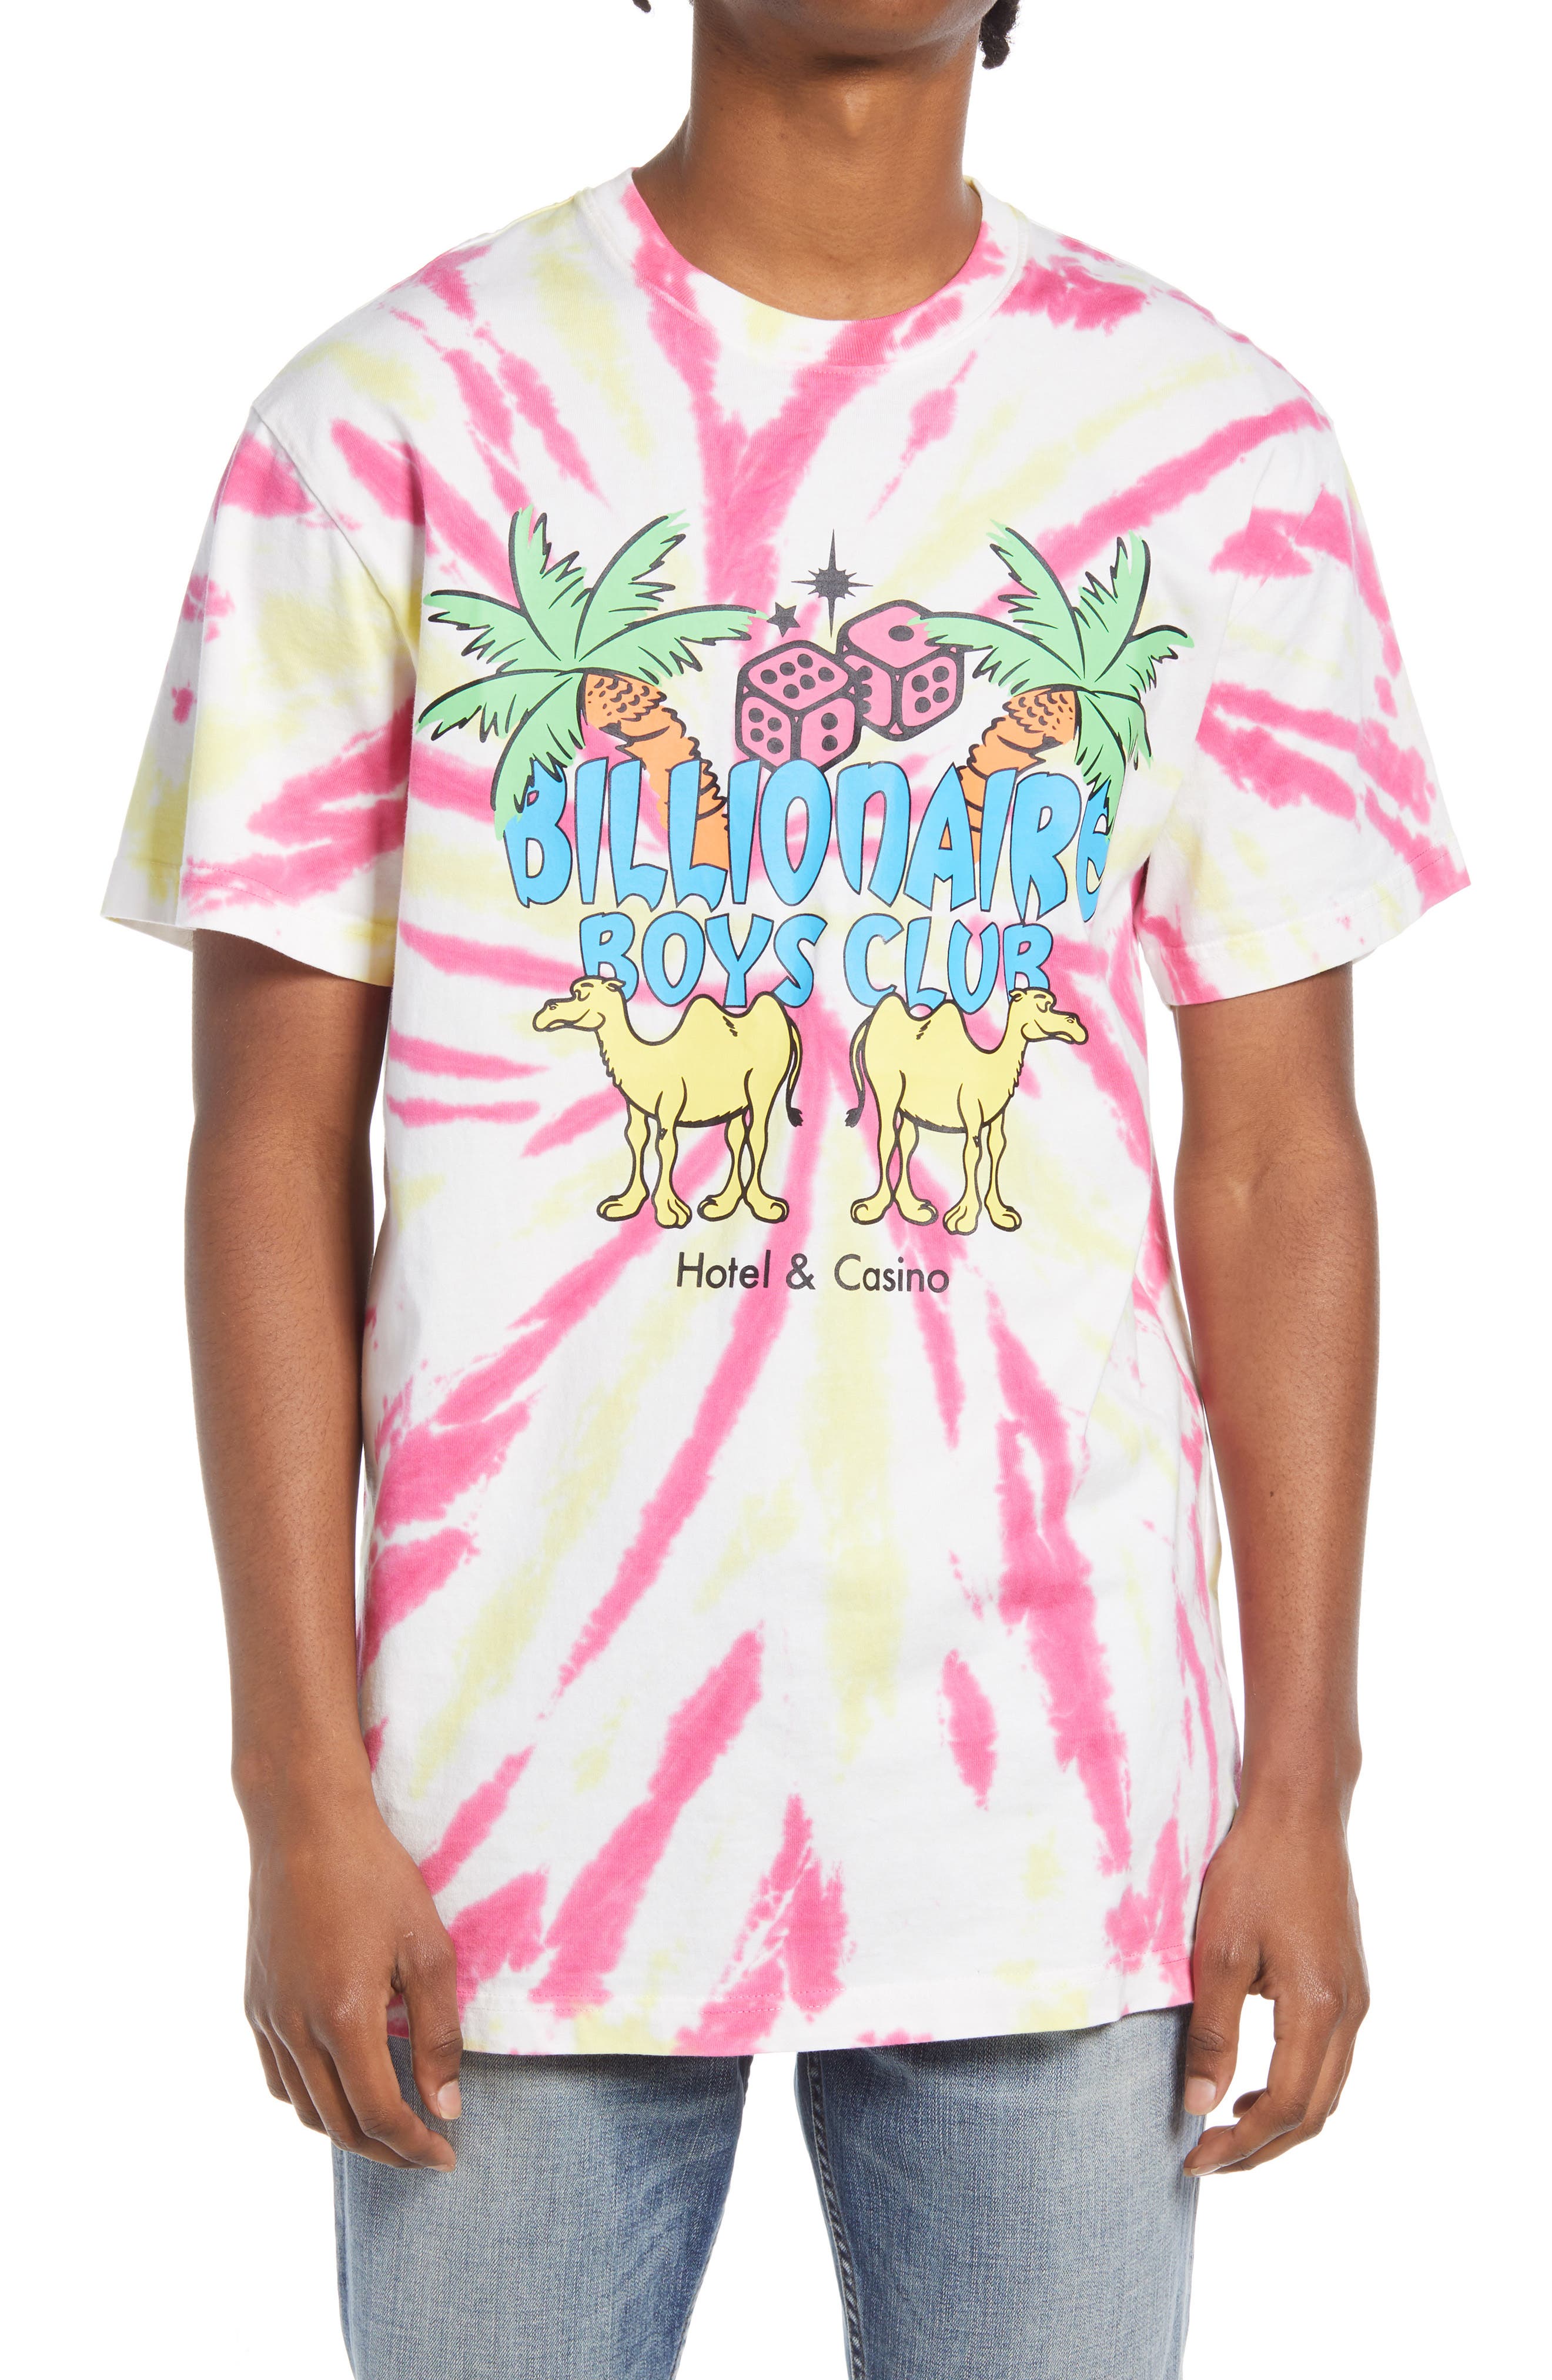 Billionaire Boys Club Men's Mirage Graphic Tee in Fandango Pink at Nordstrom, Size X-Large